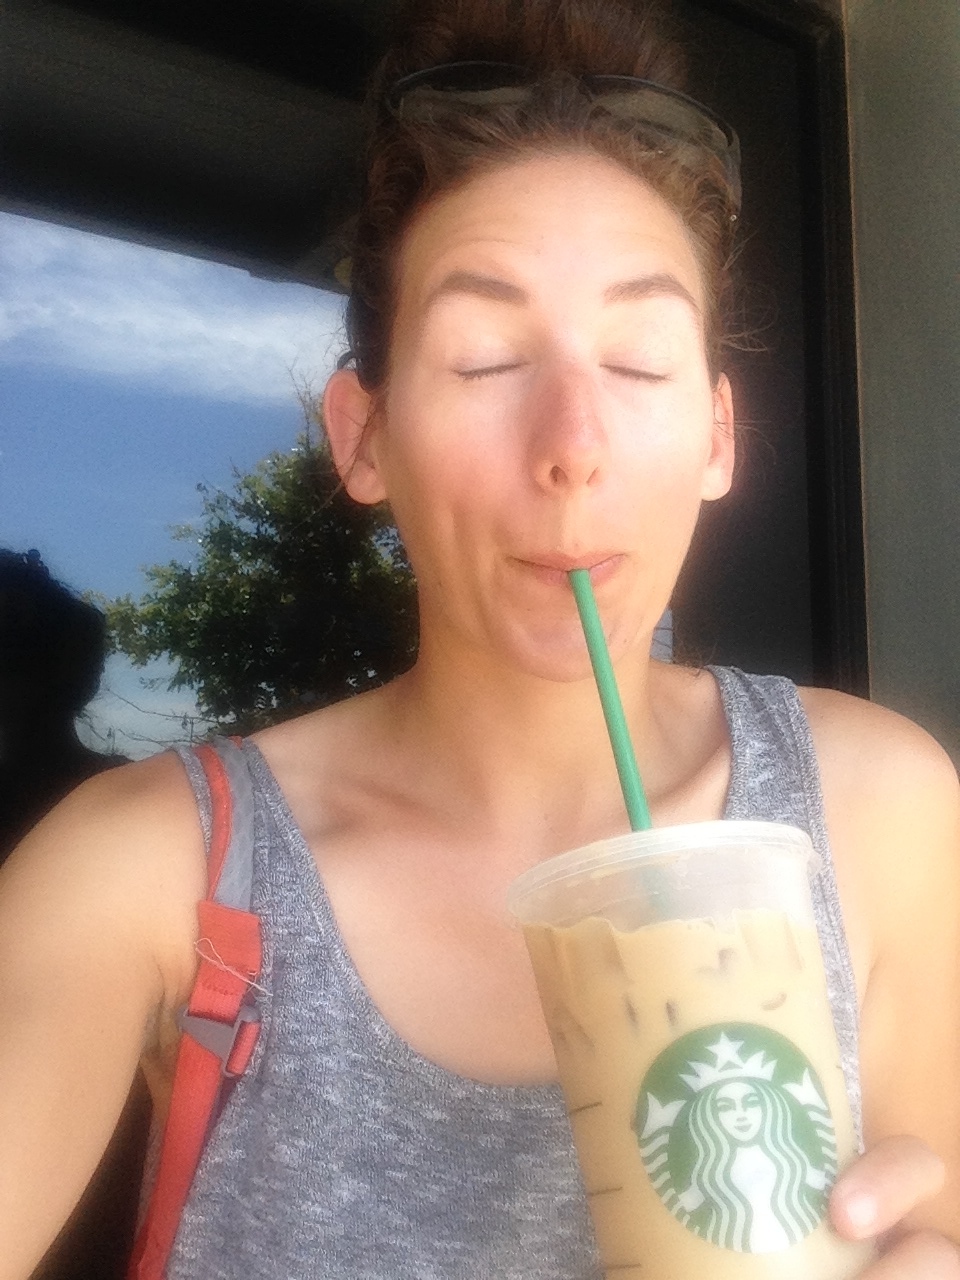   eith and The Girl sent me a Starbucks gift card through the internet. This is me enjoying the gift!  